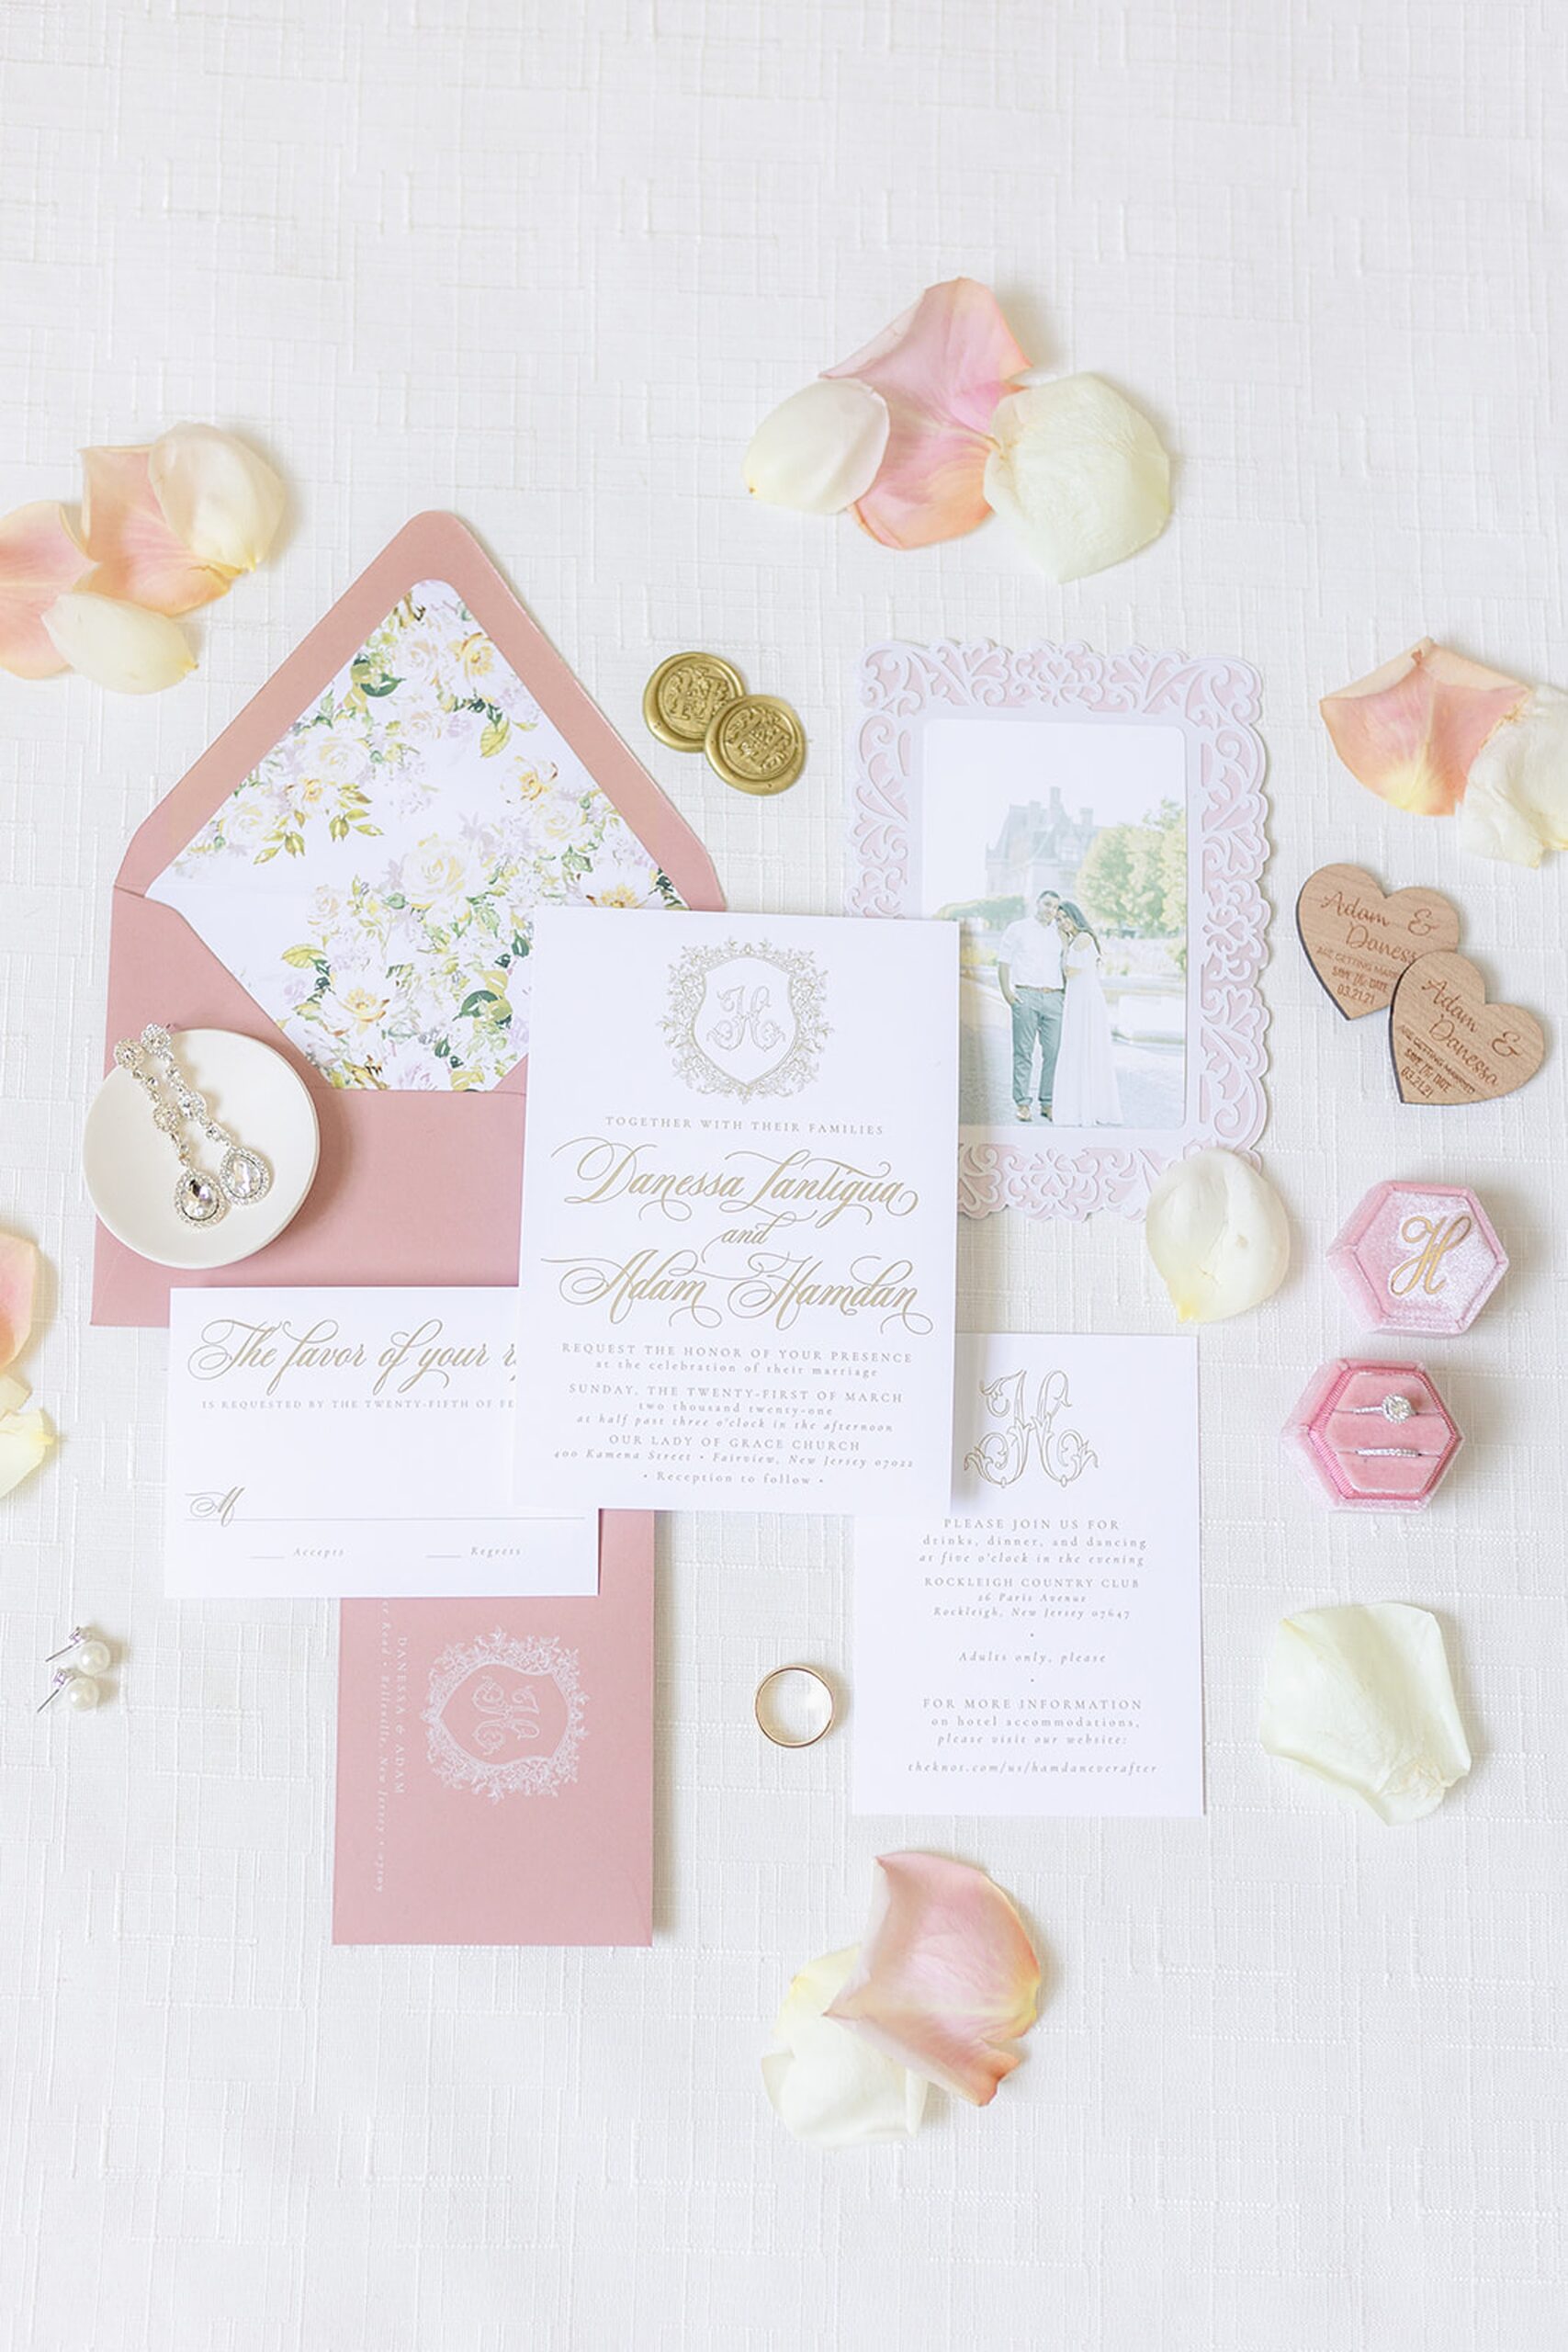 Details of wedding invitations and jewelry sitting on a white bed